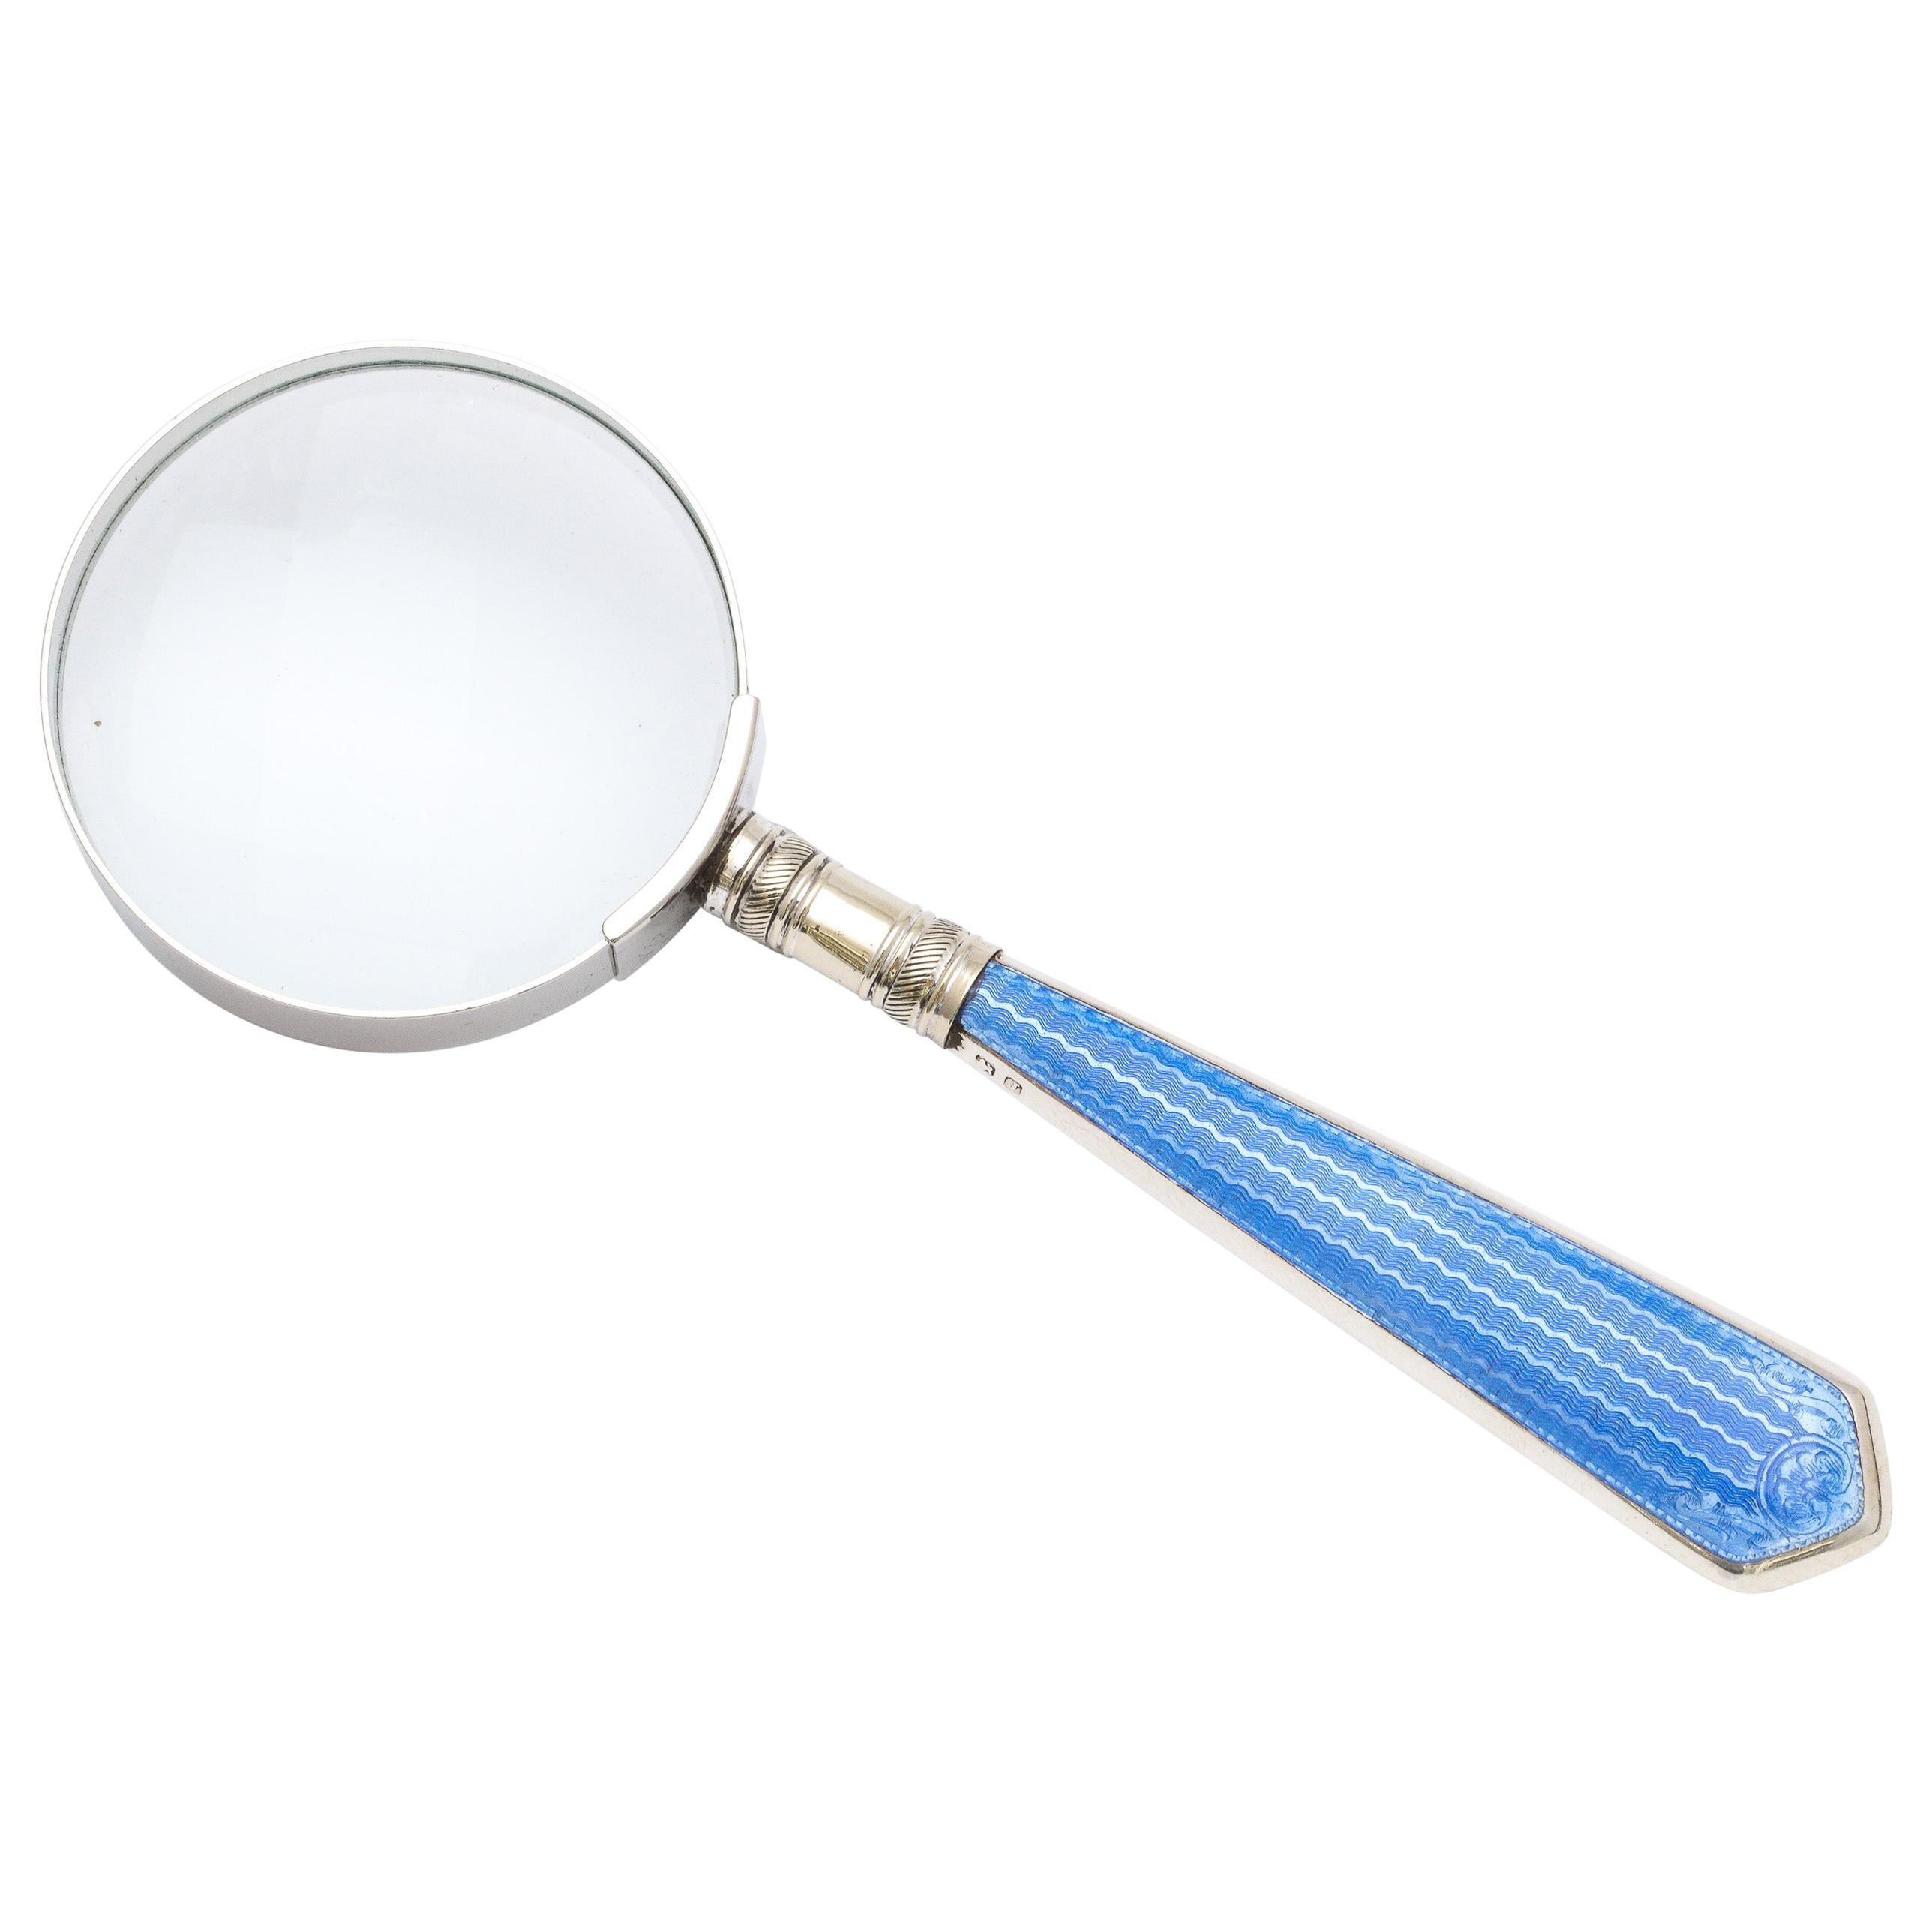 Art Deco Sterling Silver and Blue Guilloche Enamel, Mounted Magnifying Glass